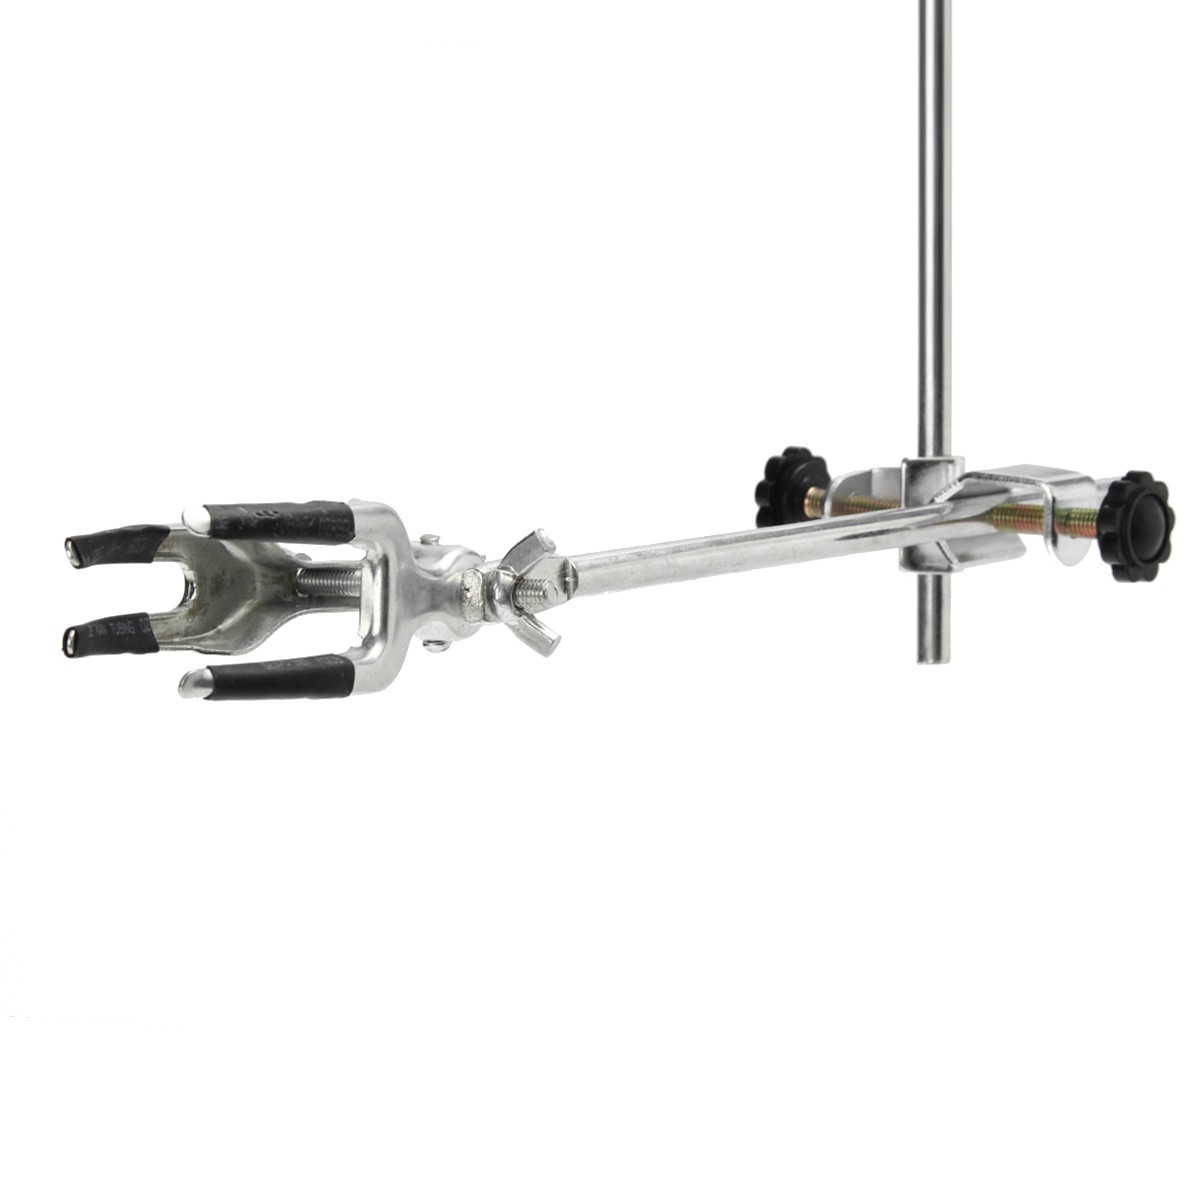 Laboratory-Stands-Support-Lab-Clamp-Flask-Clamp-Condenser-Clamp-Stand-Four-Prong-Extension-Flask-Cla-1410946-8